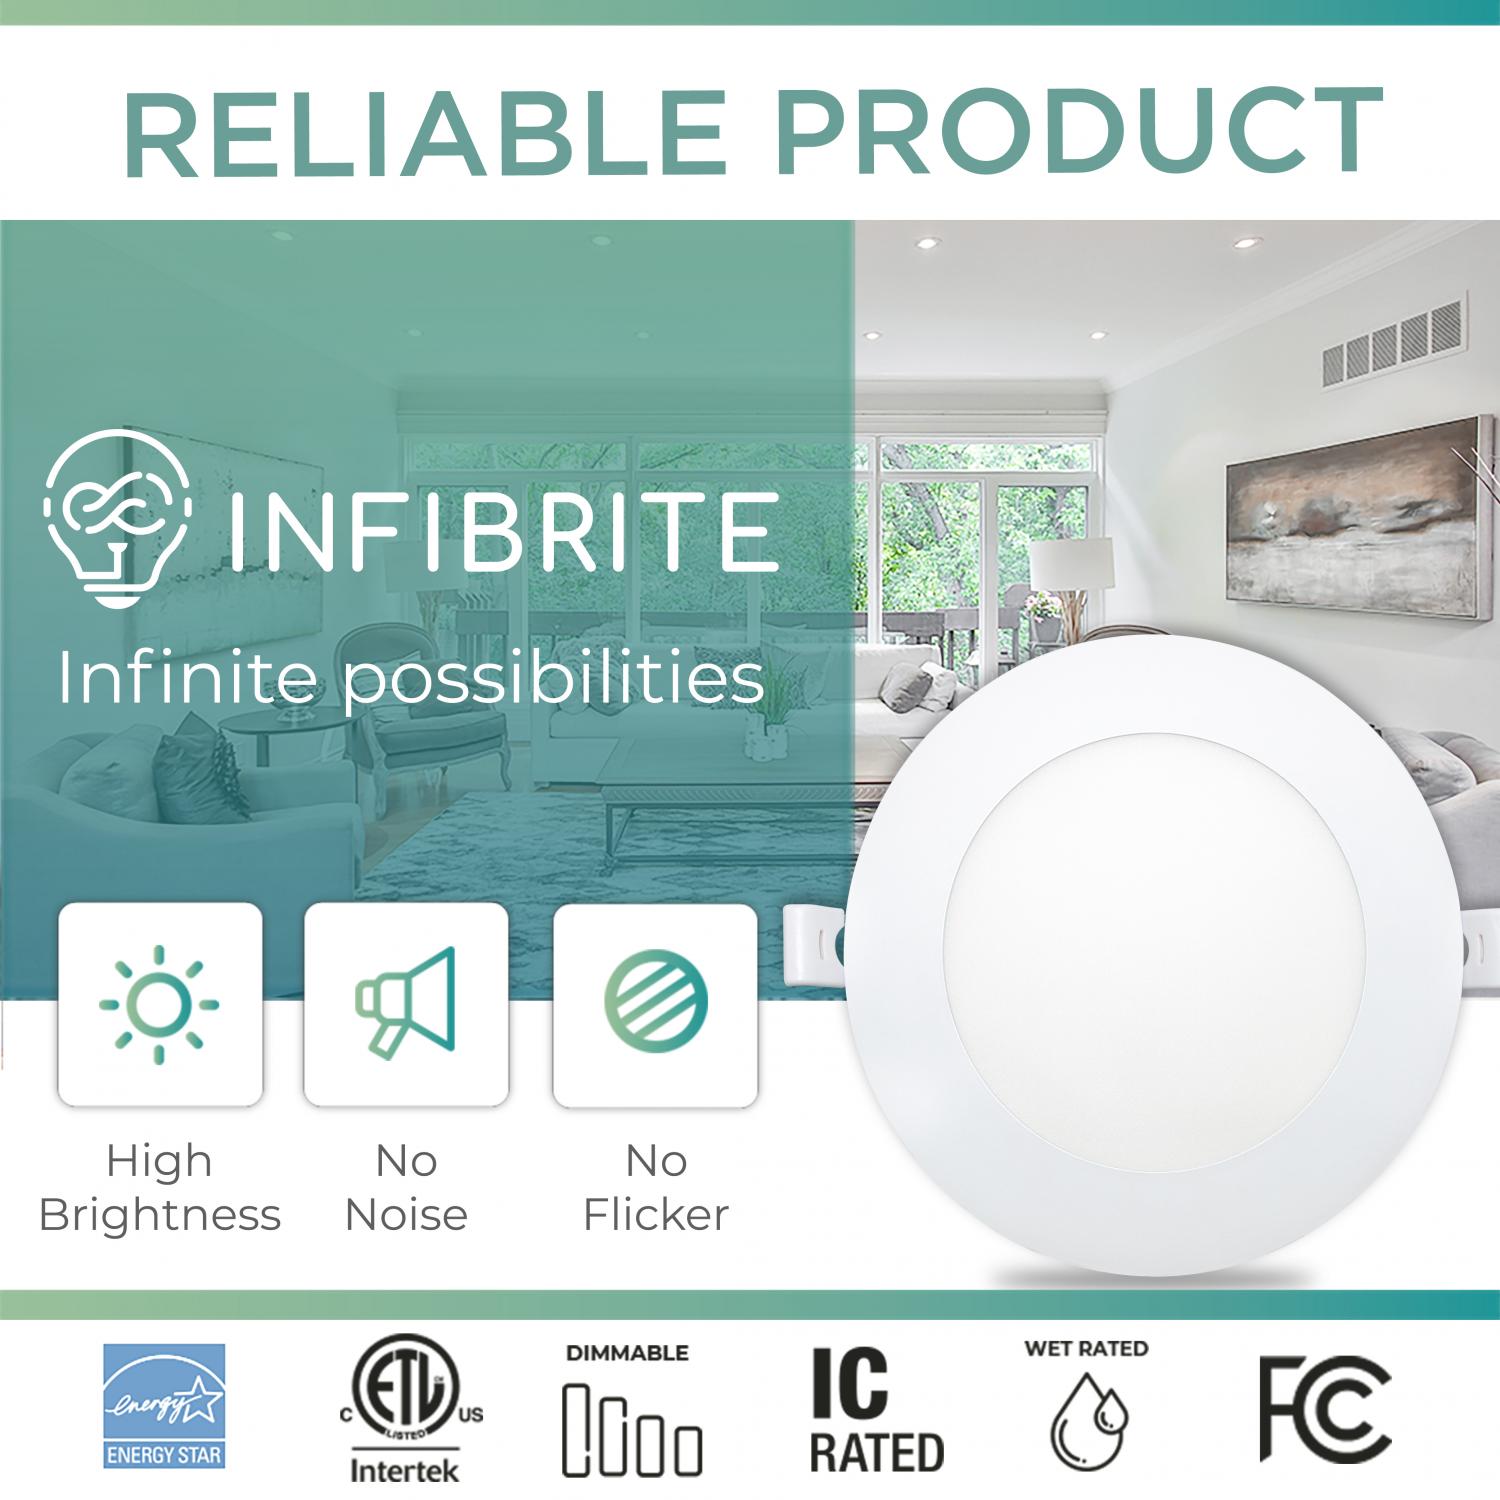 Infibrite 6 Inch 3000K/4000K/5000K Selectable 12W 1050LM Ultra-Slim LED Ceiling Light with Junction Box, Flush Mount, Dimmable, Fixture for Bedroom, Wet Rated for Bathroom, Easy Install, 110W Eqv, ETL & Energy Star, US Company